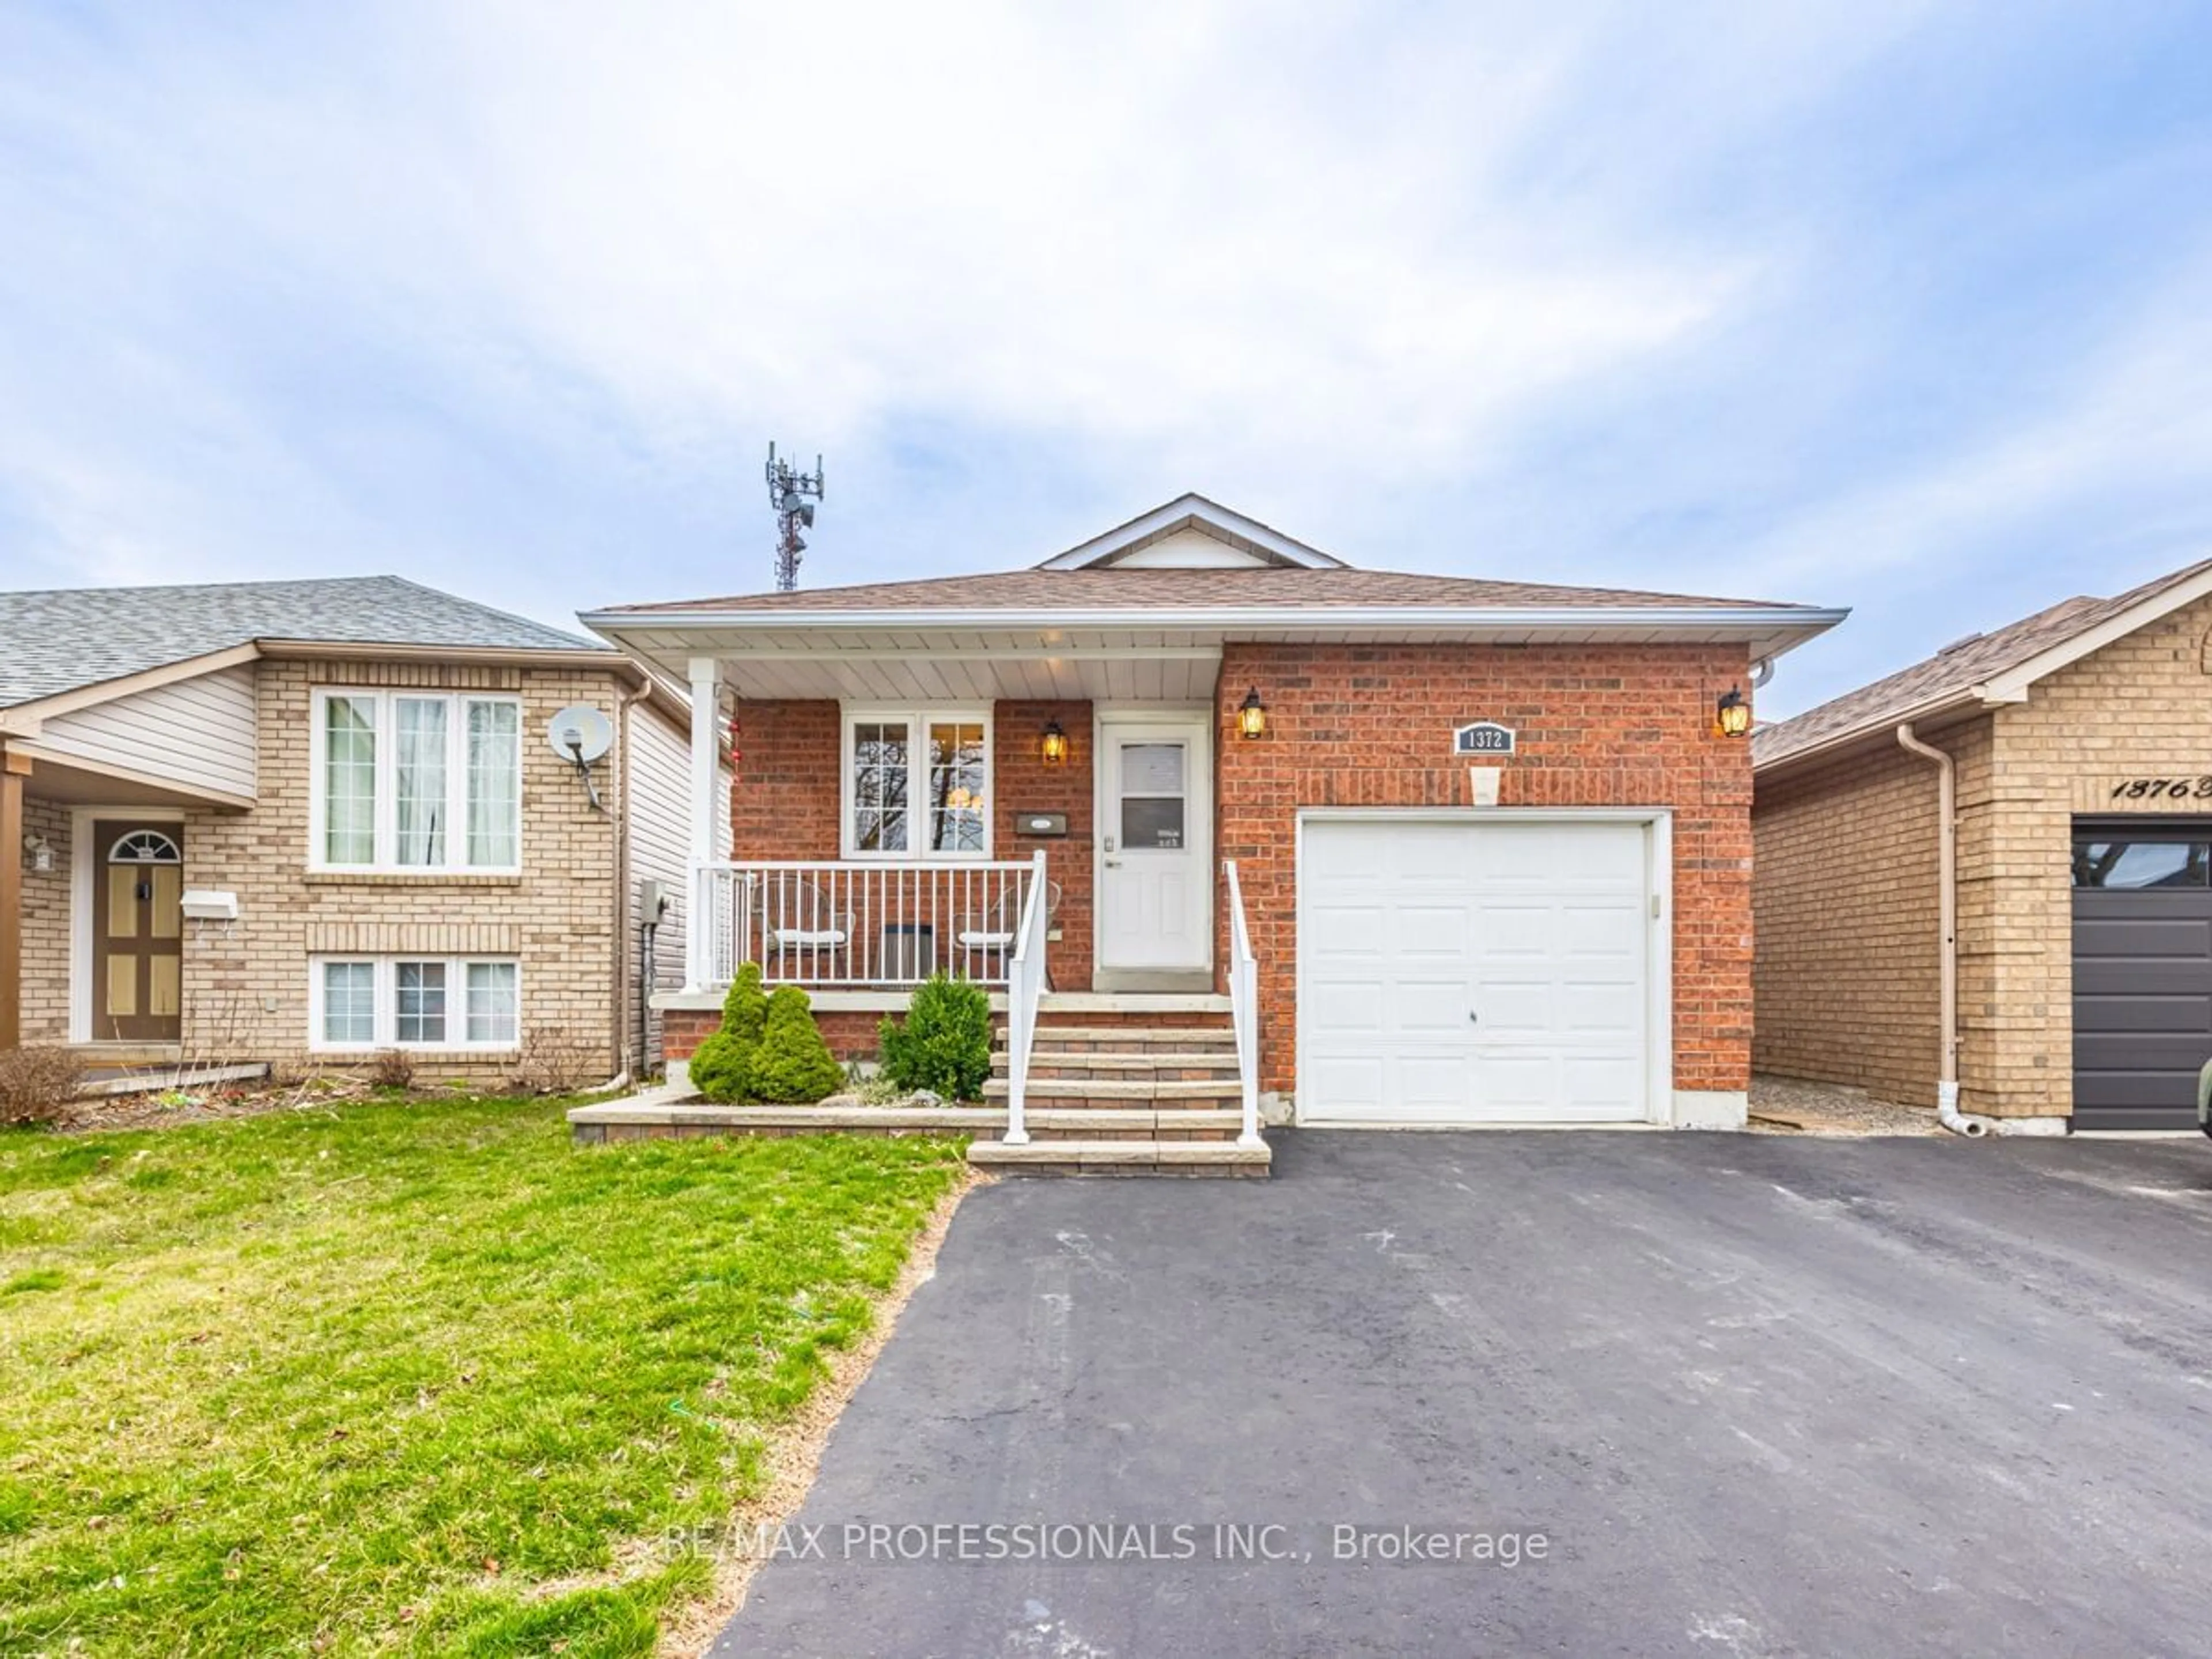 Home with brick exterior material for 1372 Trowbridge Dr, Oshawa Ontario L1G 7L1